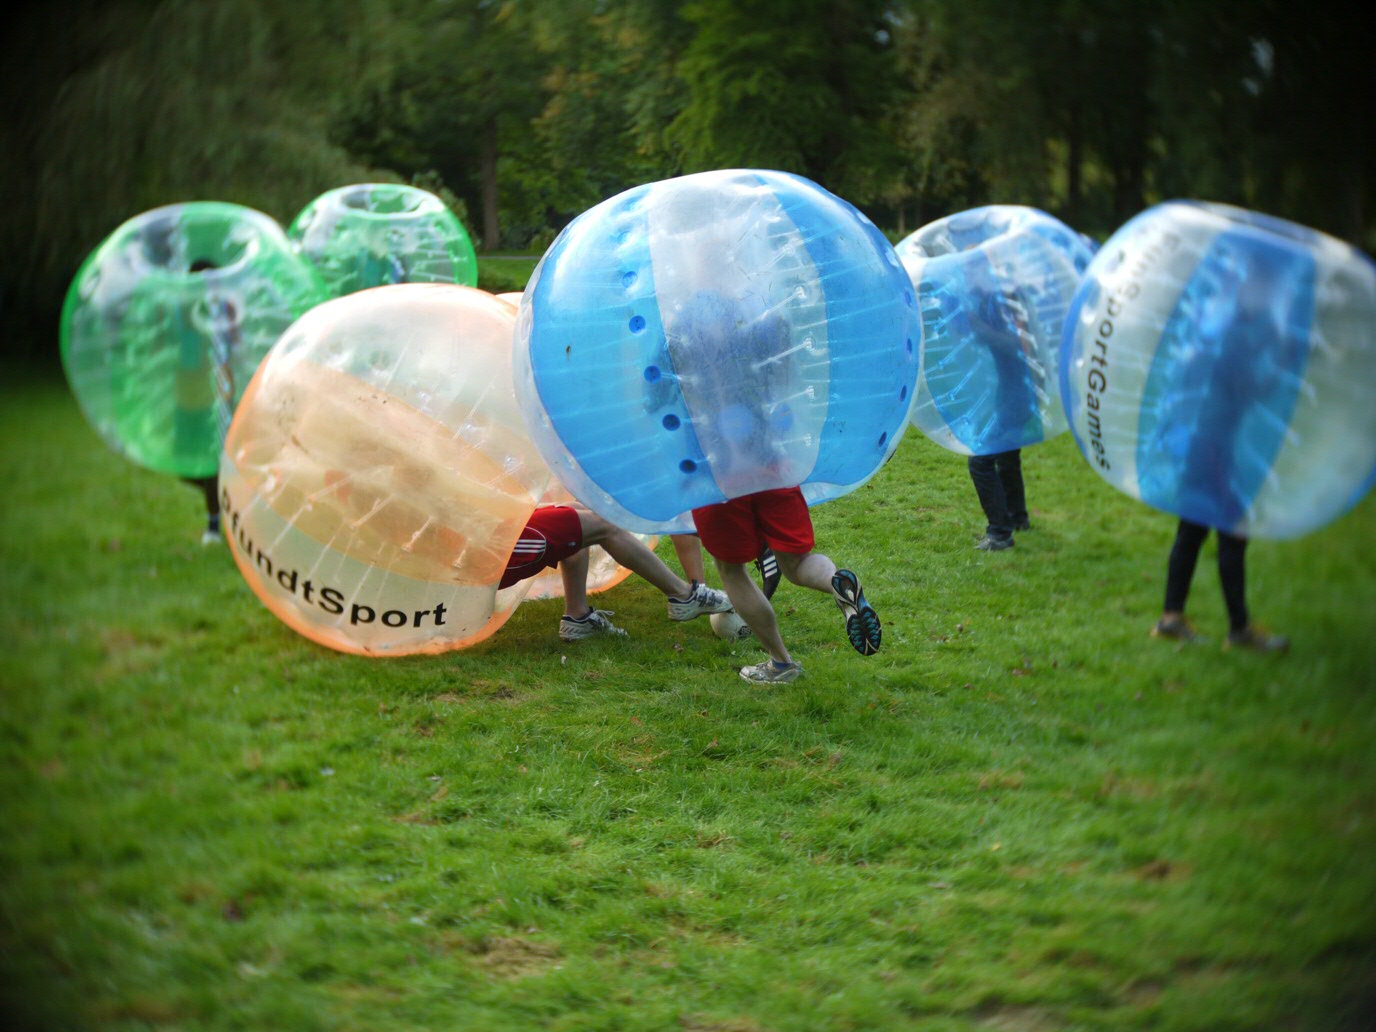 Our team in action during the bubble-soccer deathmatch action